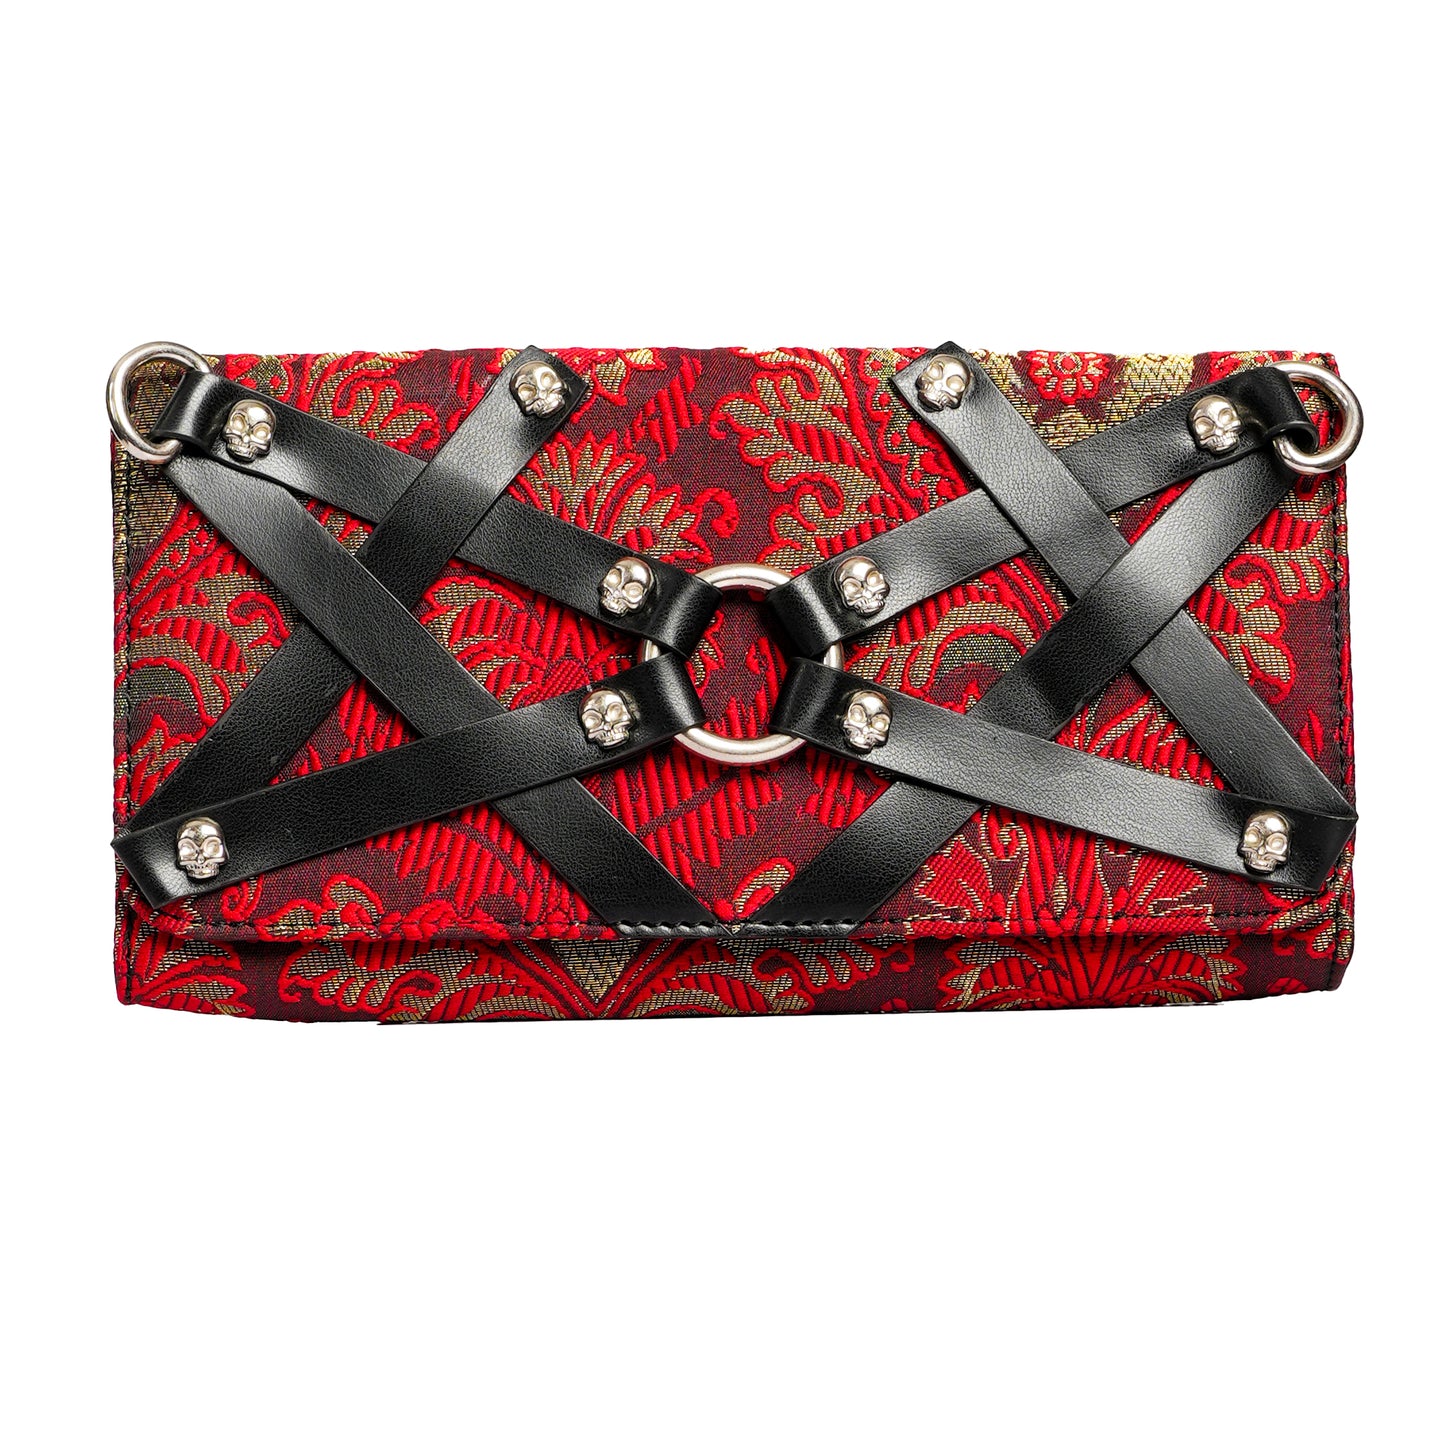 Faux Leather and Red jacquard Fusion: Wholesale Edgy Skull-Studded Clutch